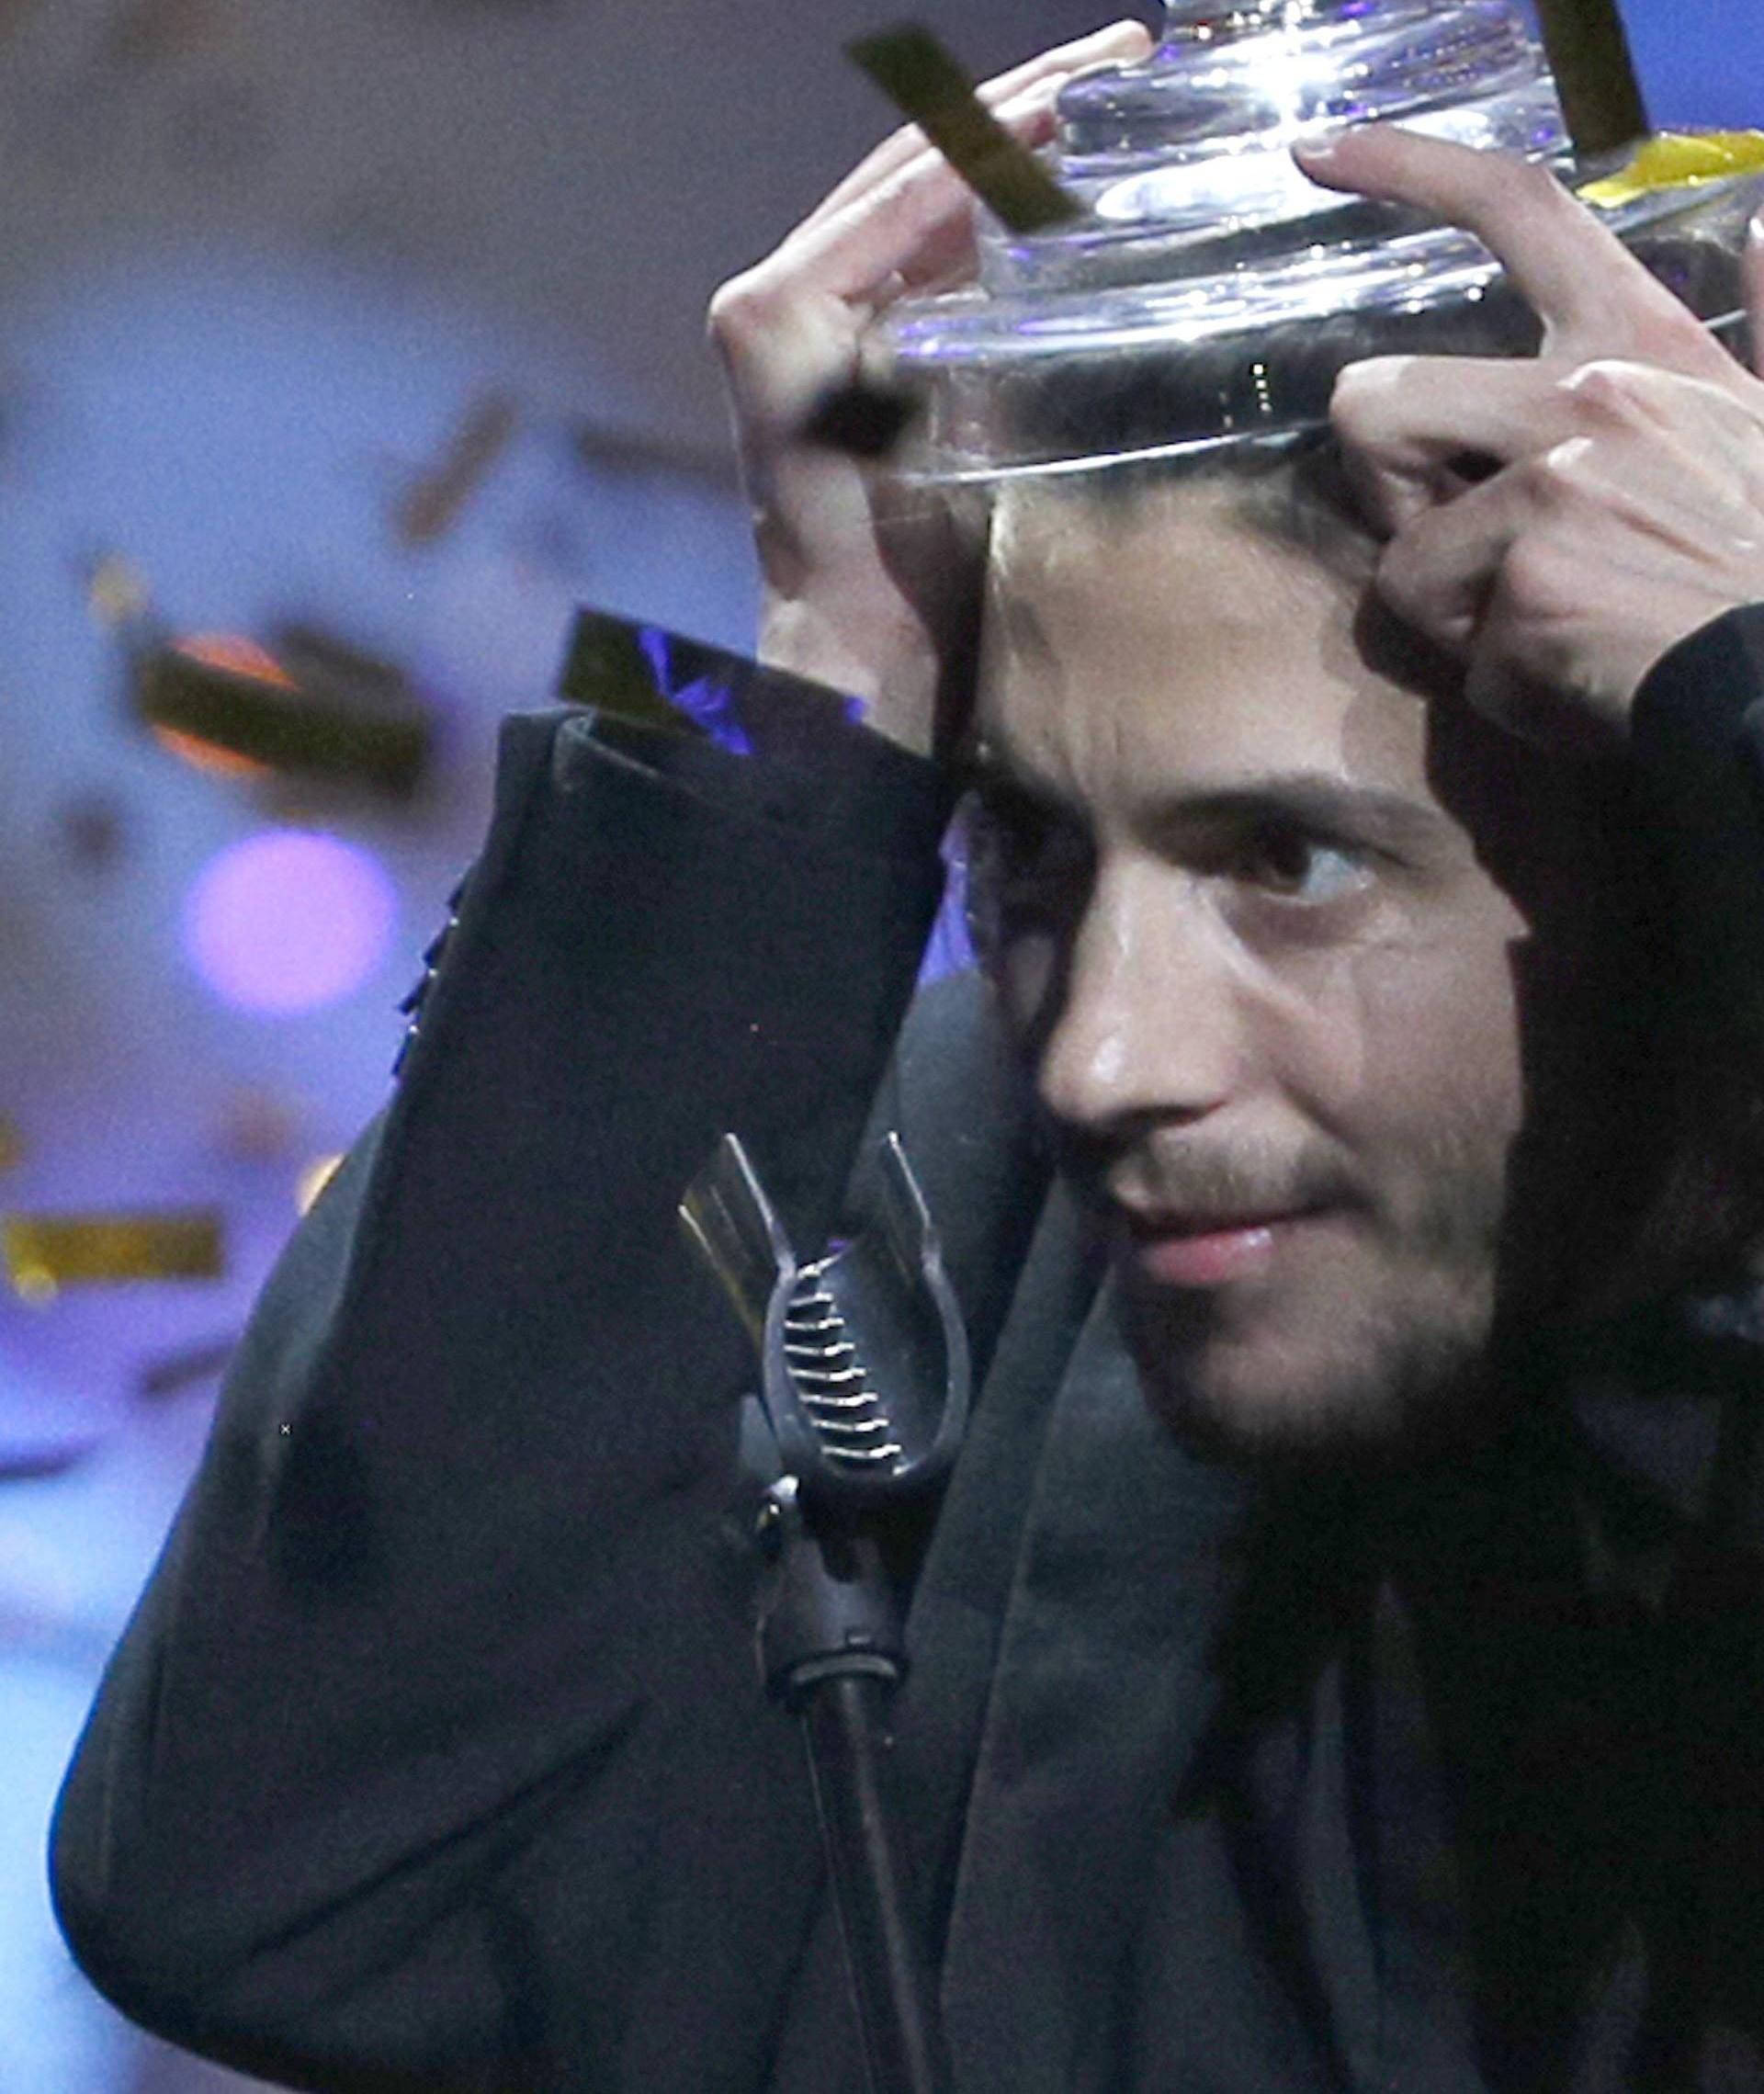 Portugal's Salvador Sobral celebrates after winning the grand final of the Eurovision Song Contest 2017 at the International Exhibition Centre in Kiev